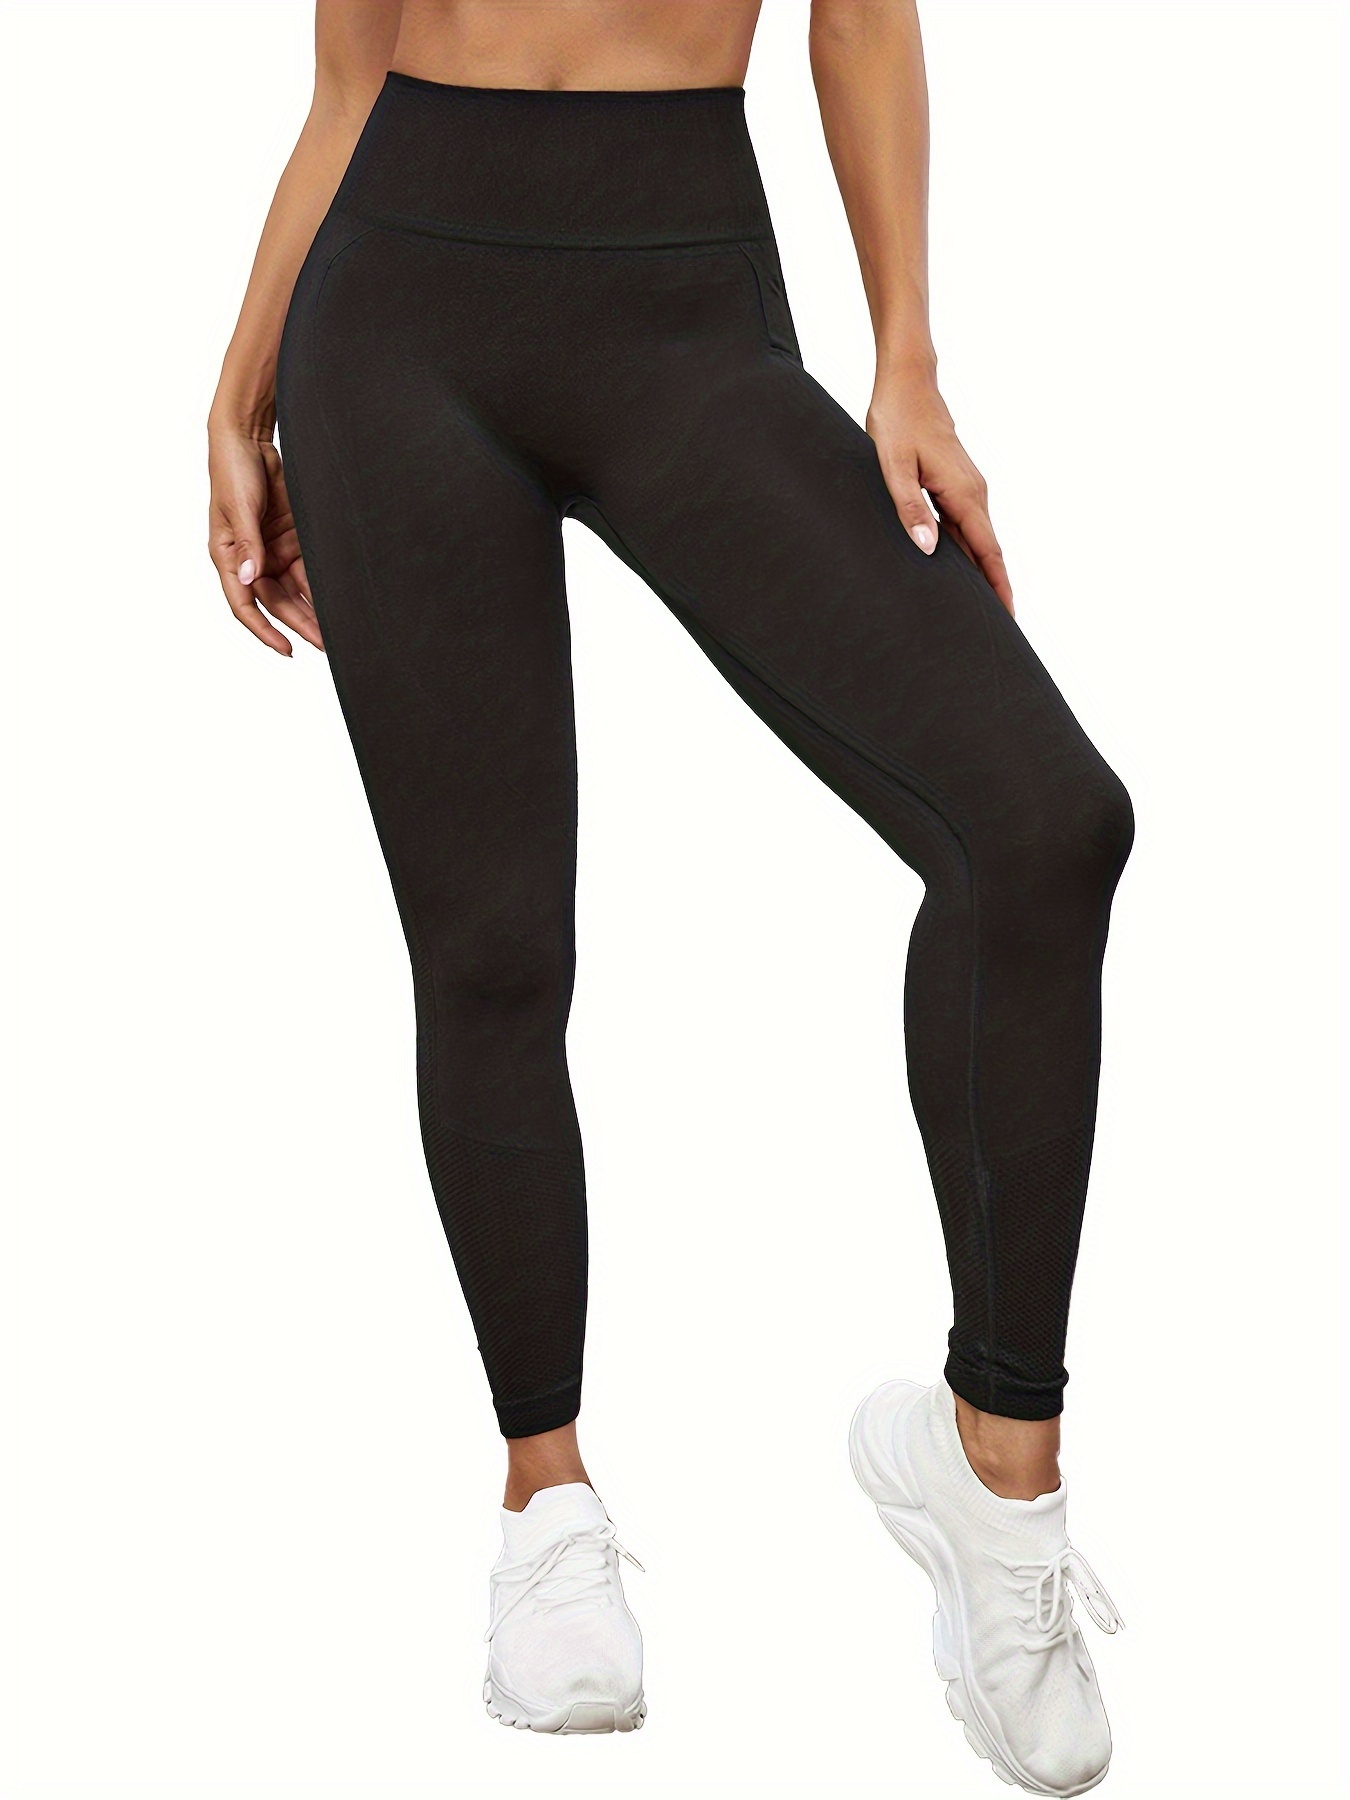 Absorbs Sweat Seamless Top-stitching Sports Leggings